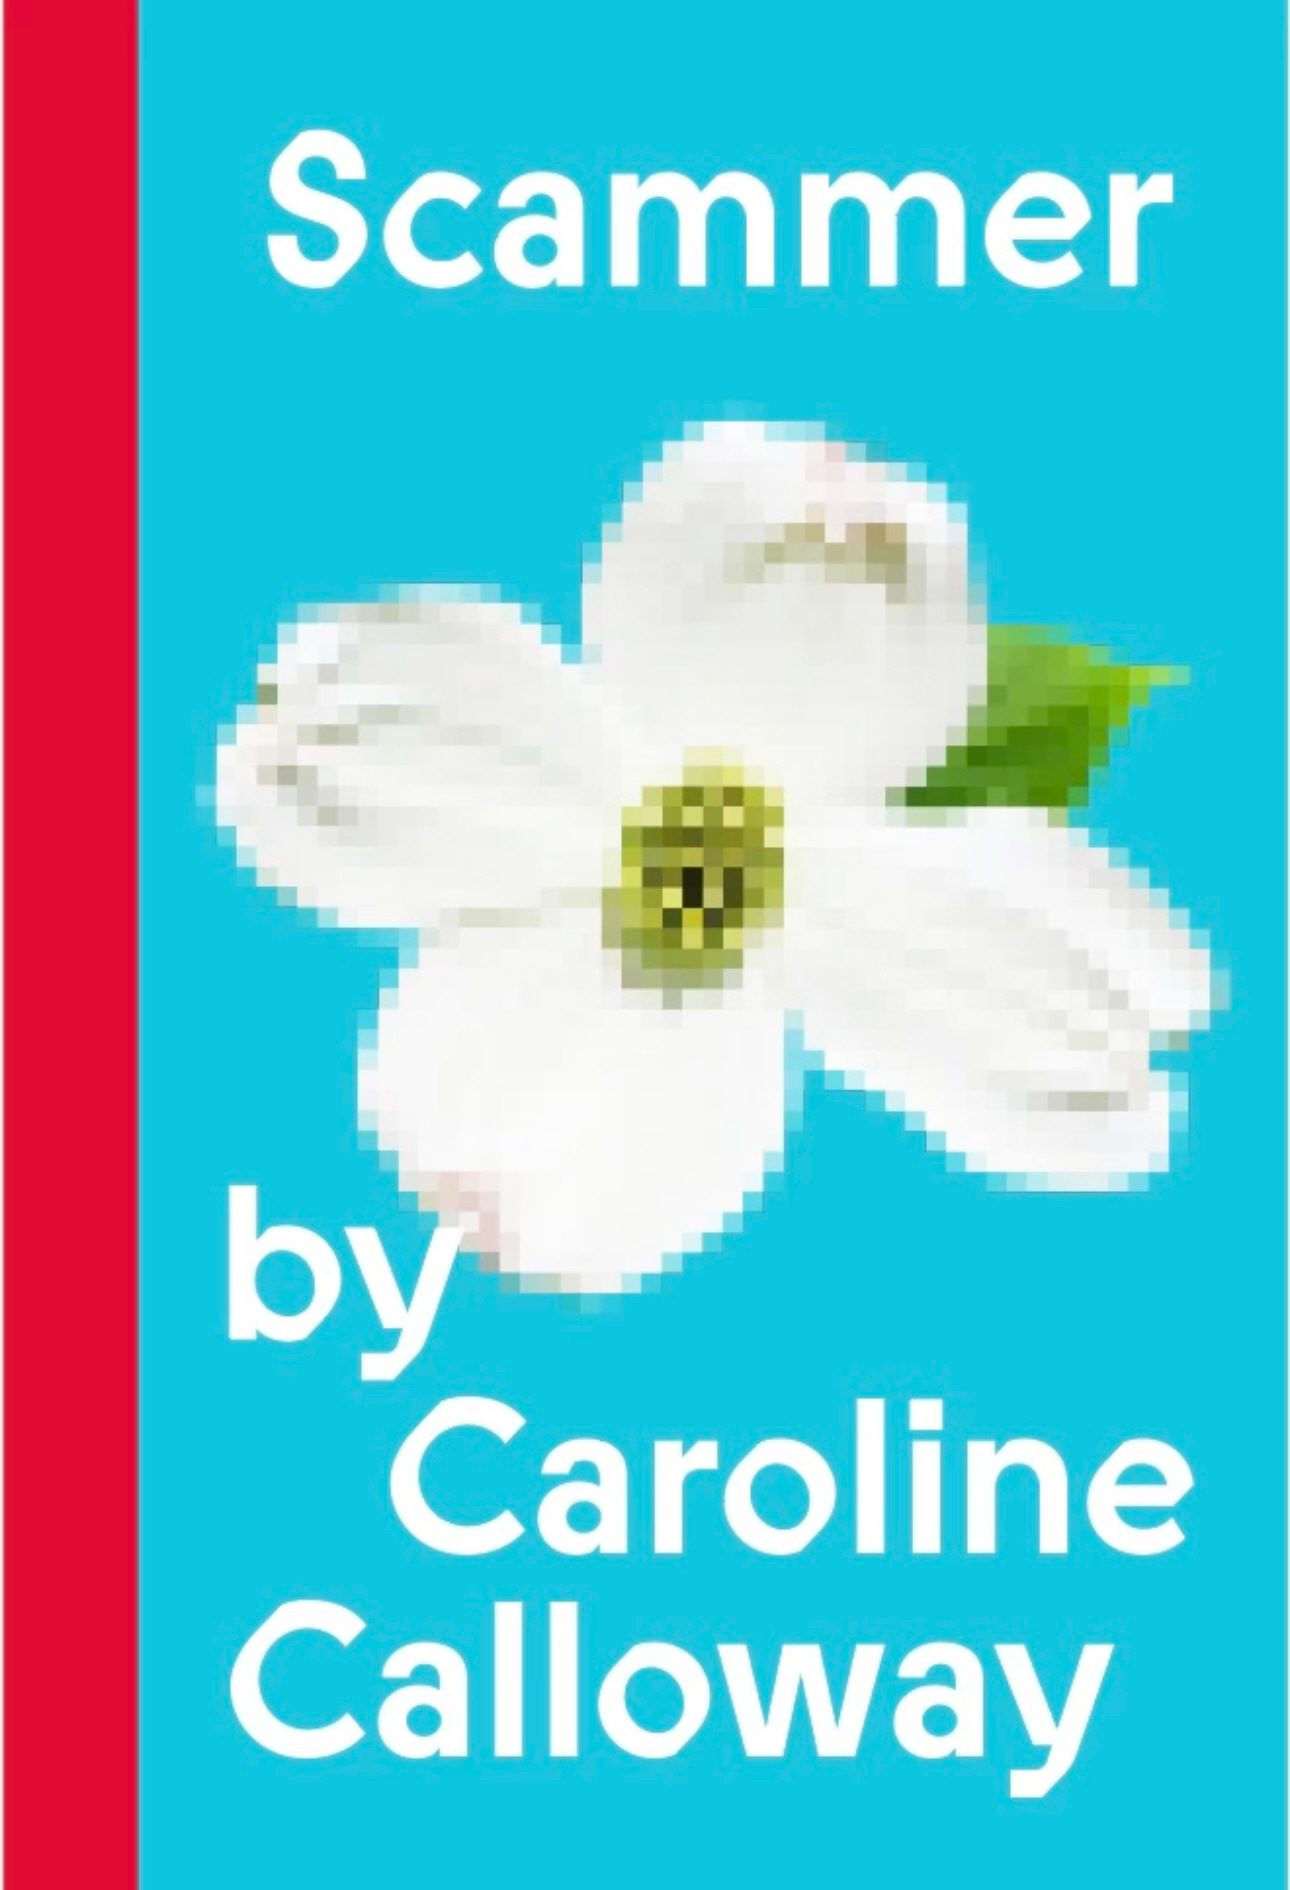 Scammer by Caroline Calloway | Goodreads